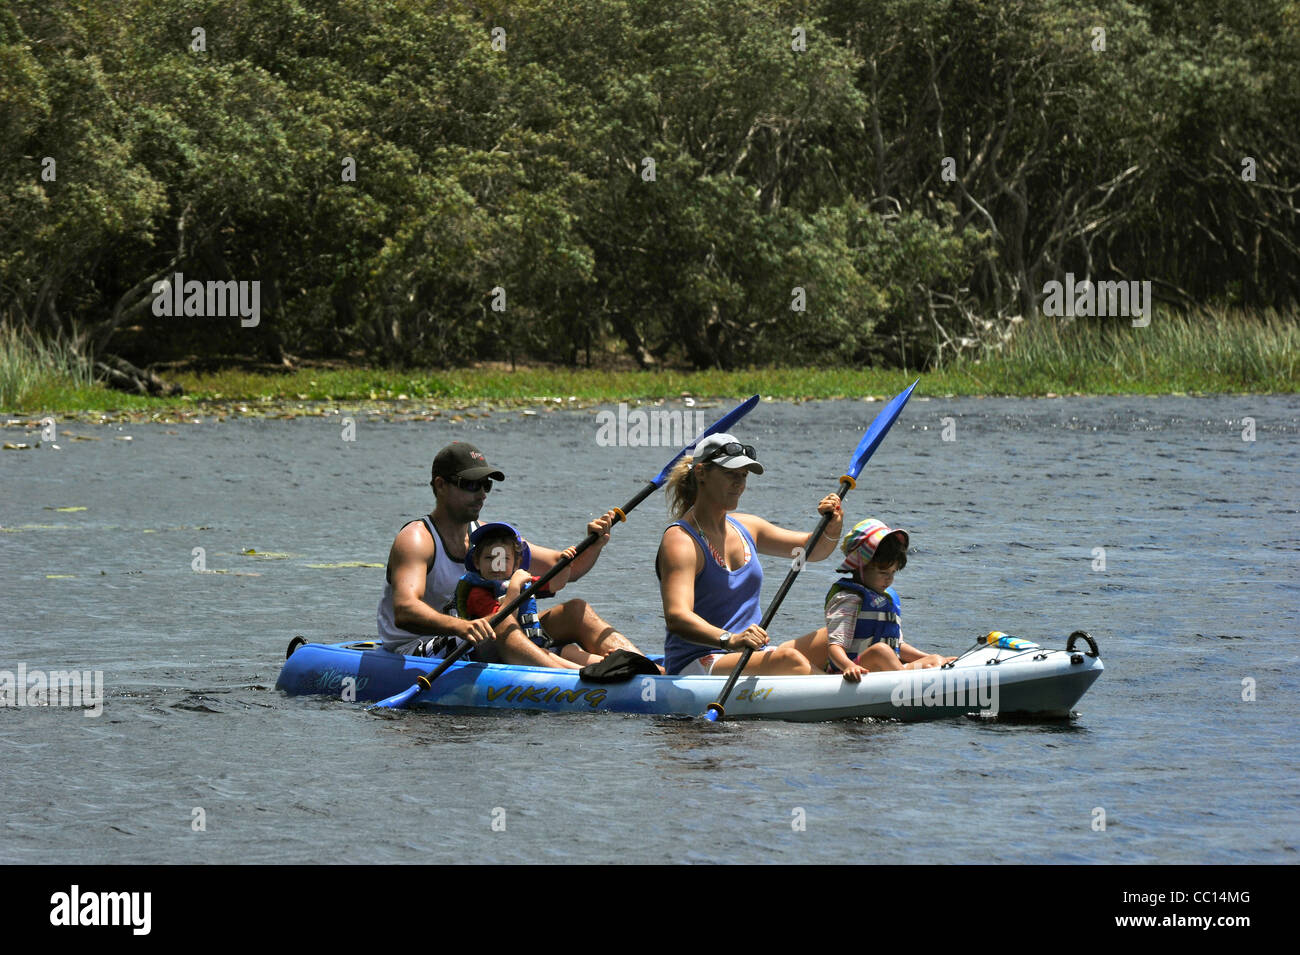 A Family paddle a canoe together on a Lake Stock Photo